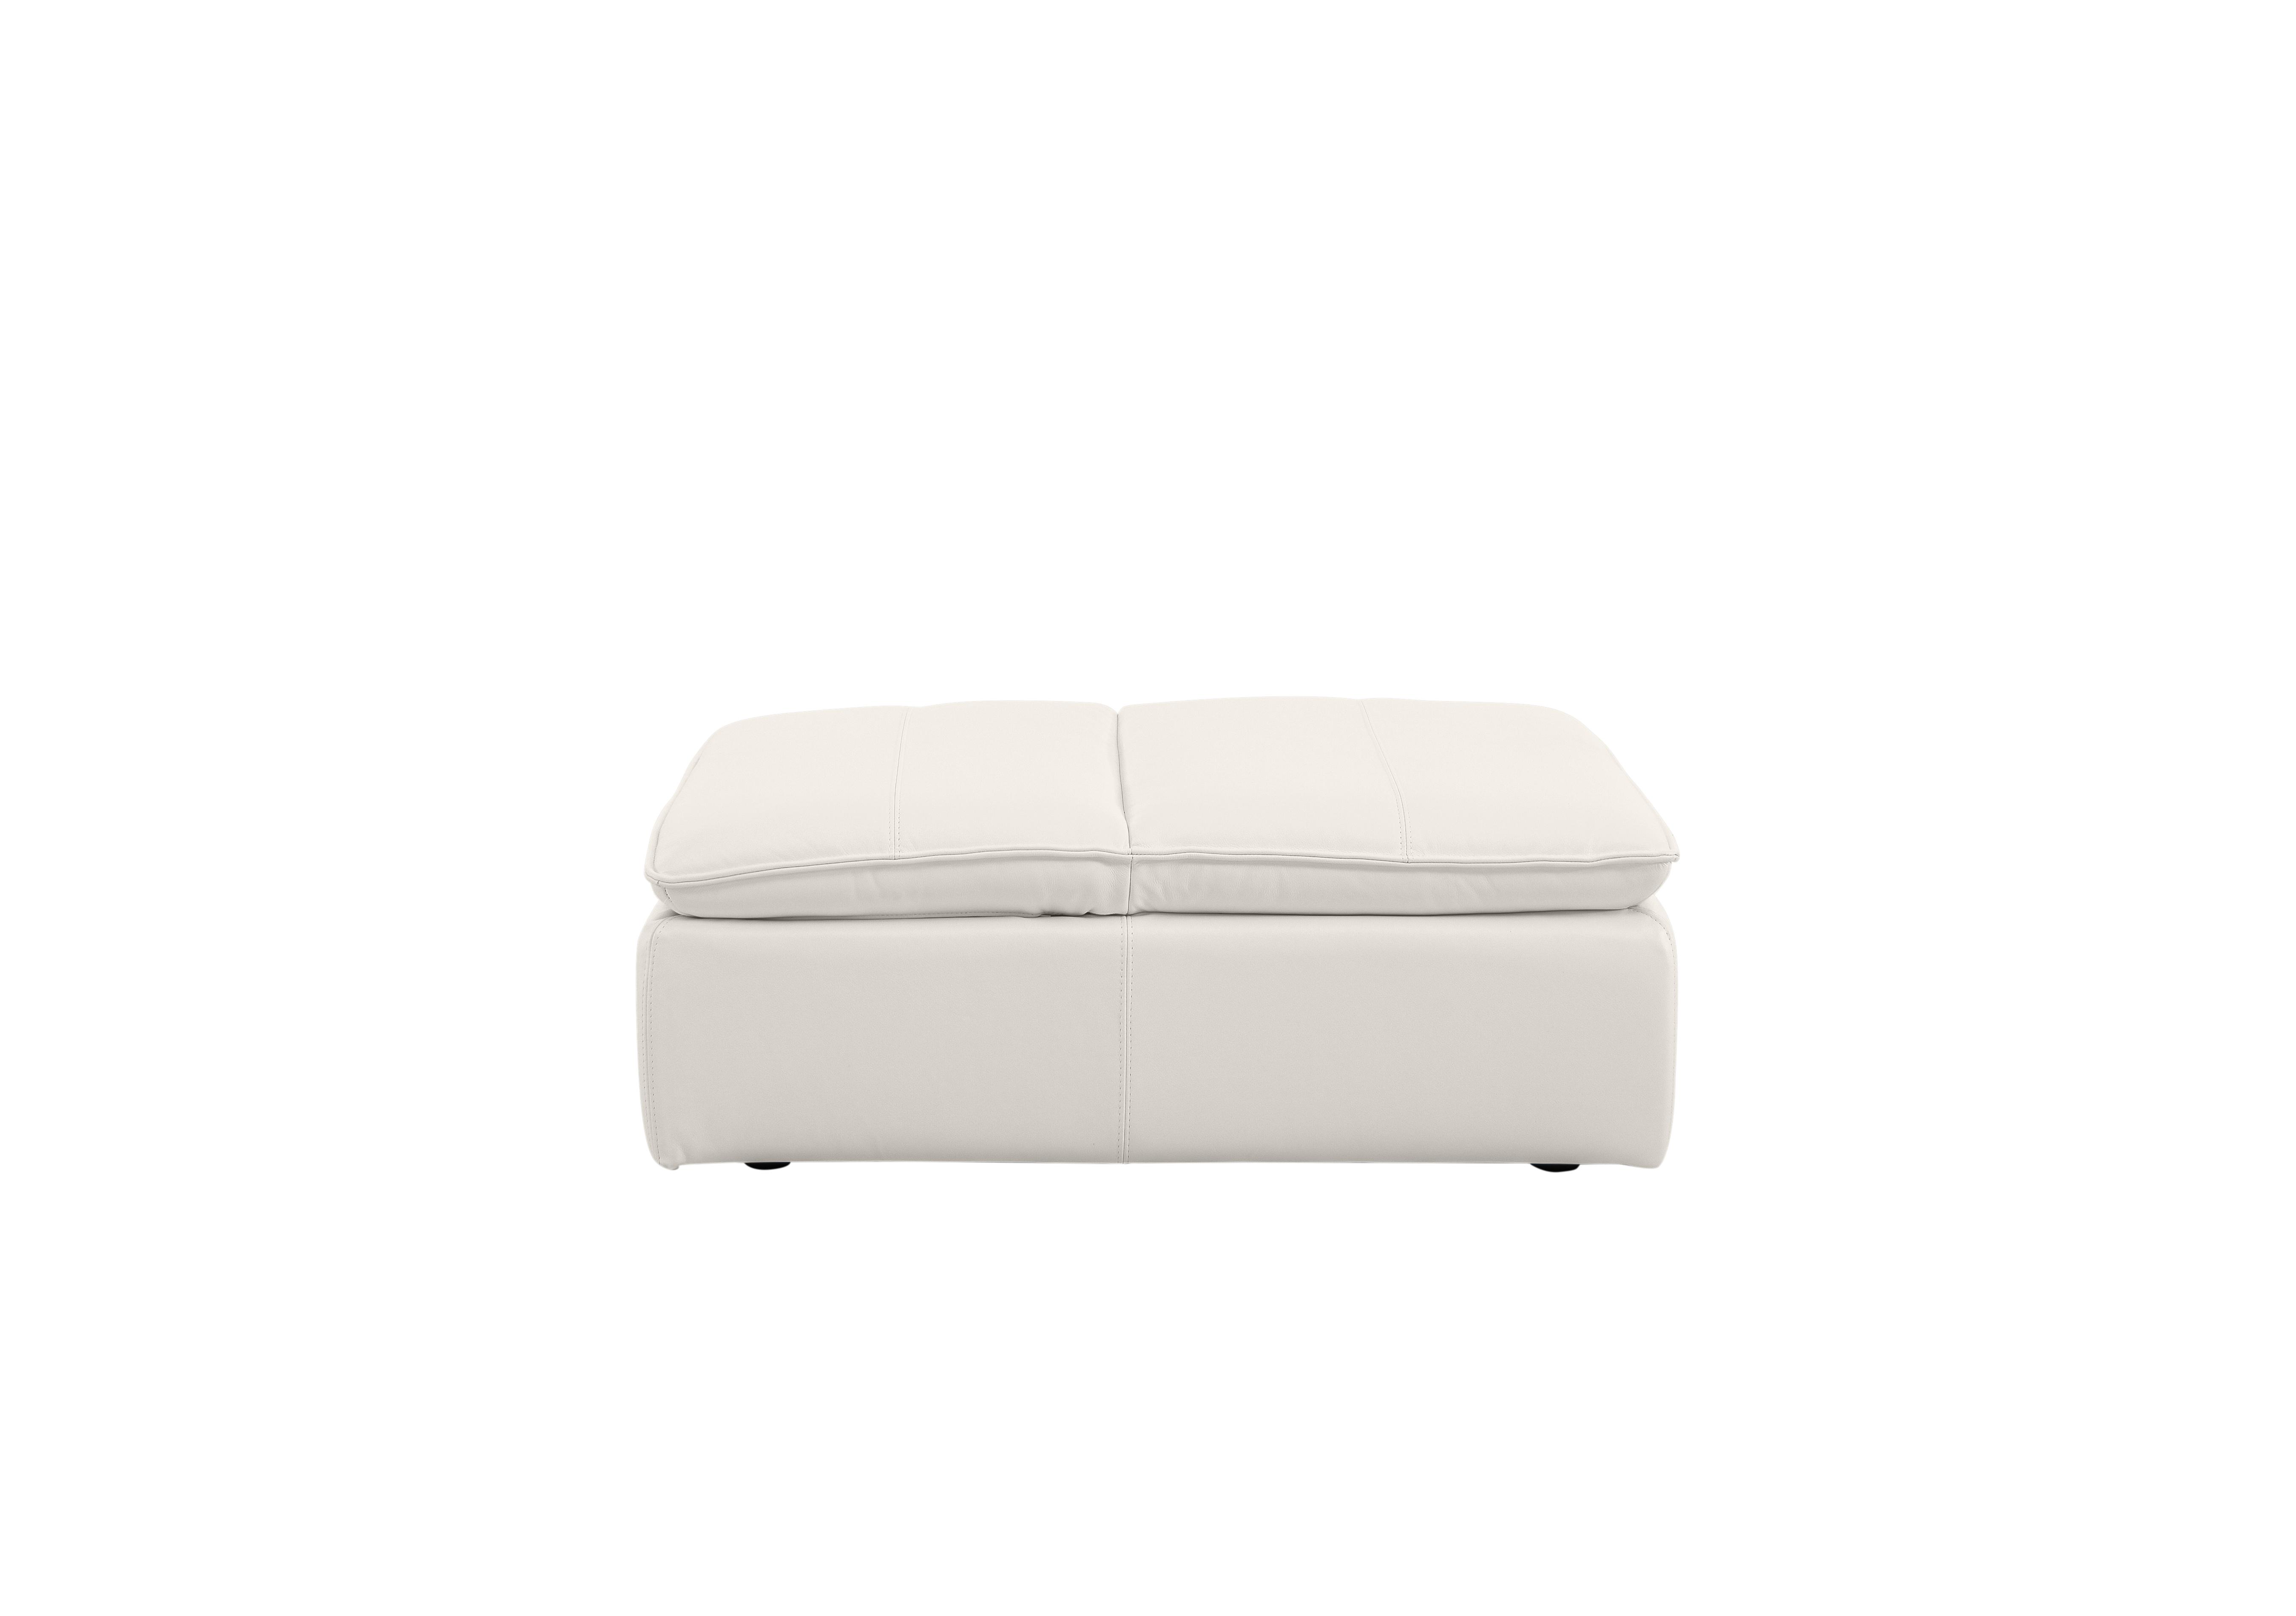 Starlight Express Leather Chair Footstool in Bv-744d Star White on Furniture Village